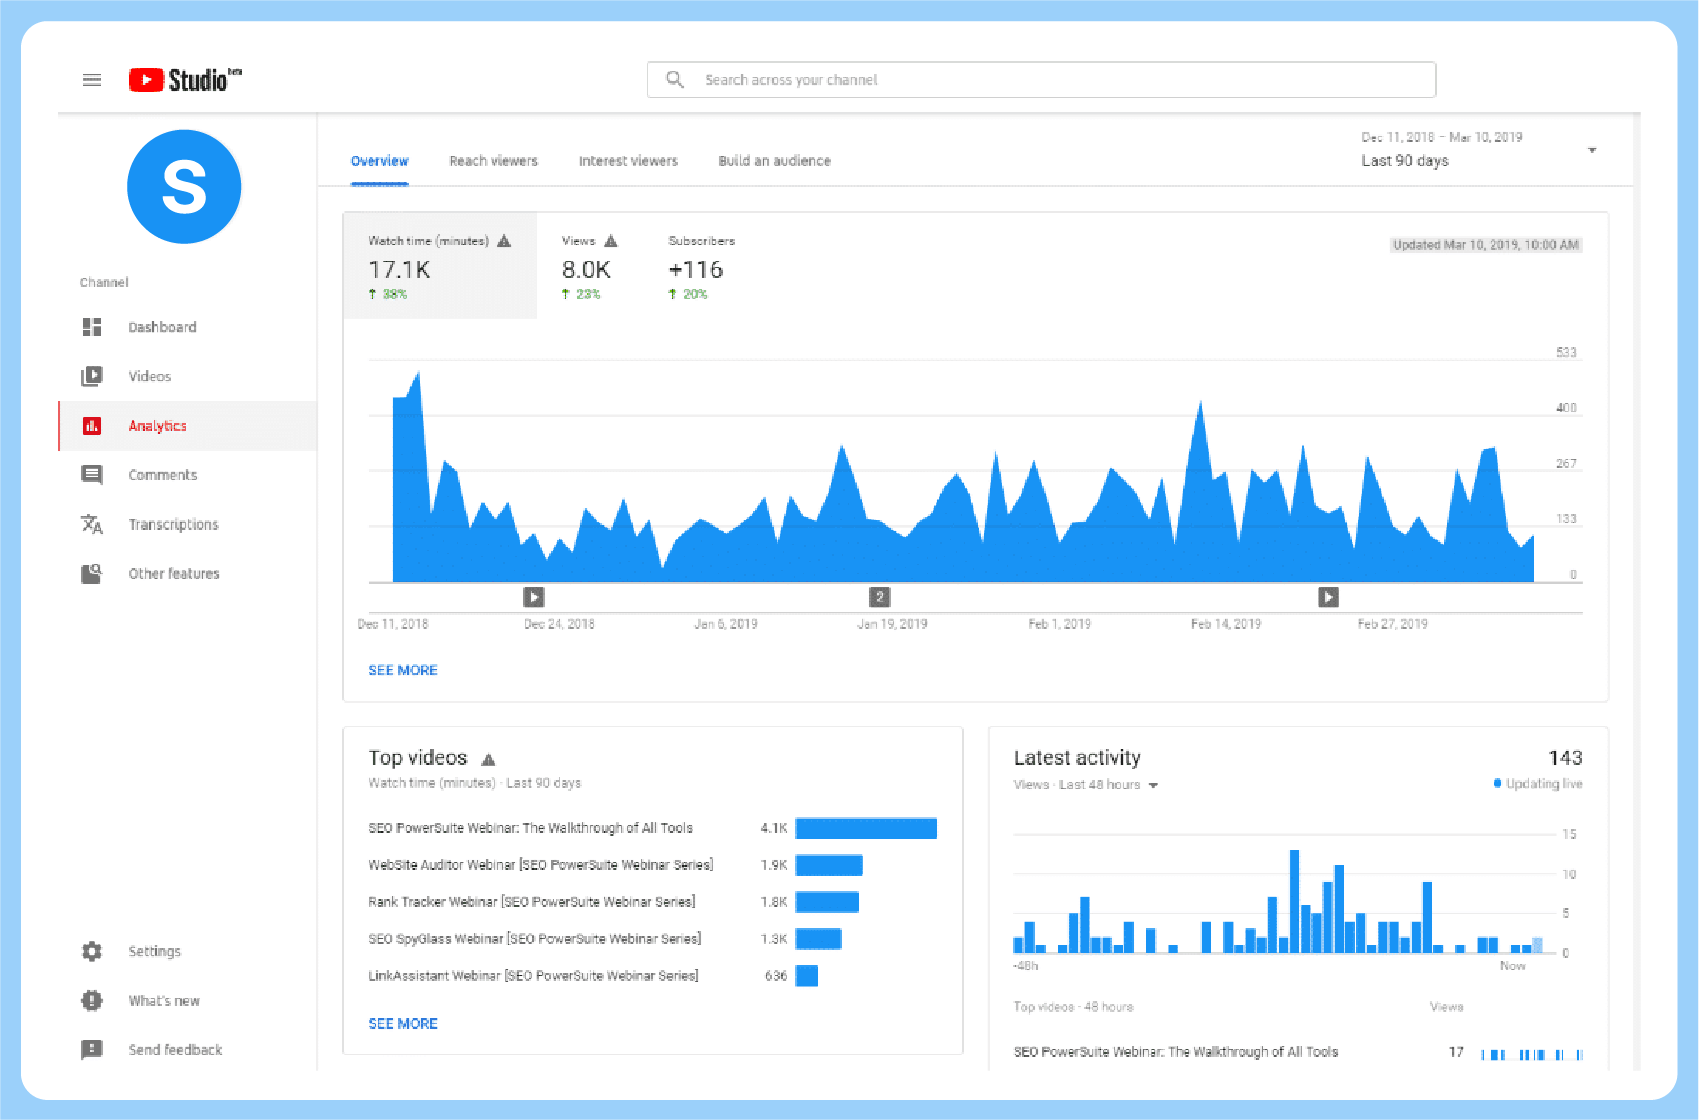 Tracking analytics and make similar content to topics that bring in views